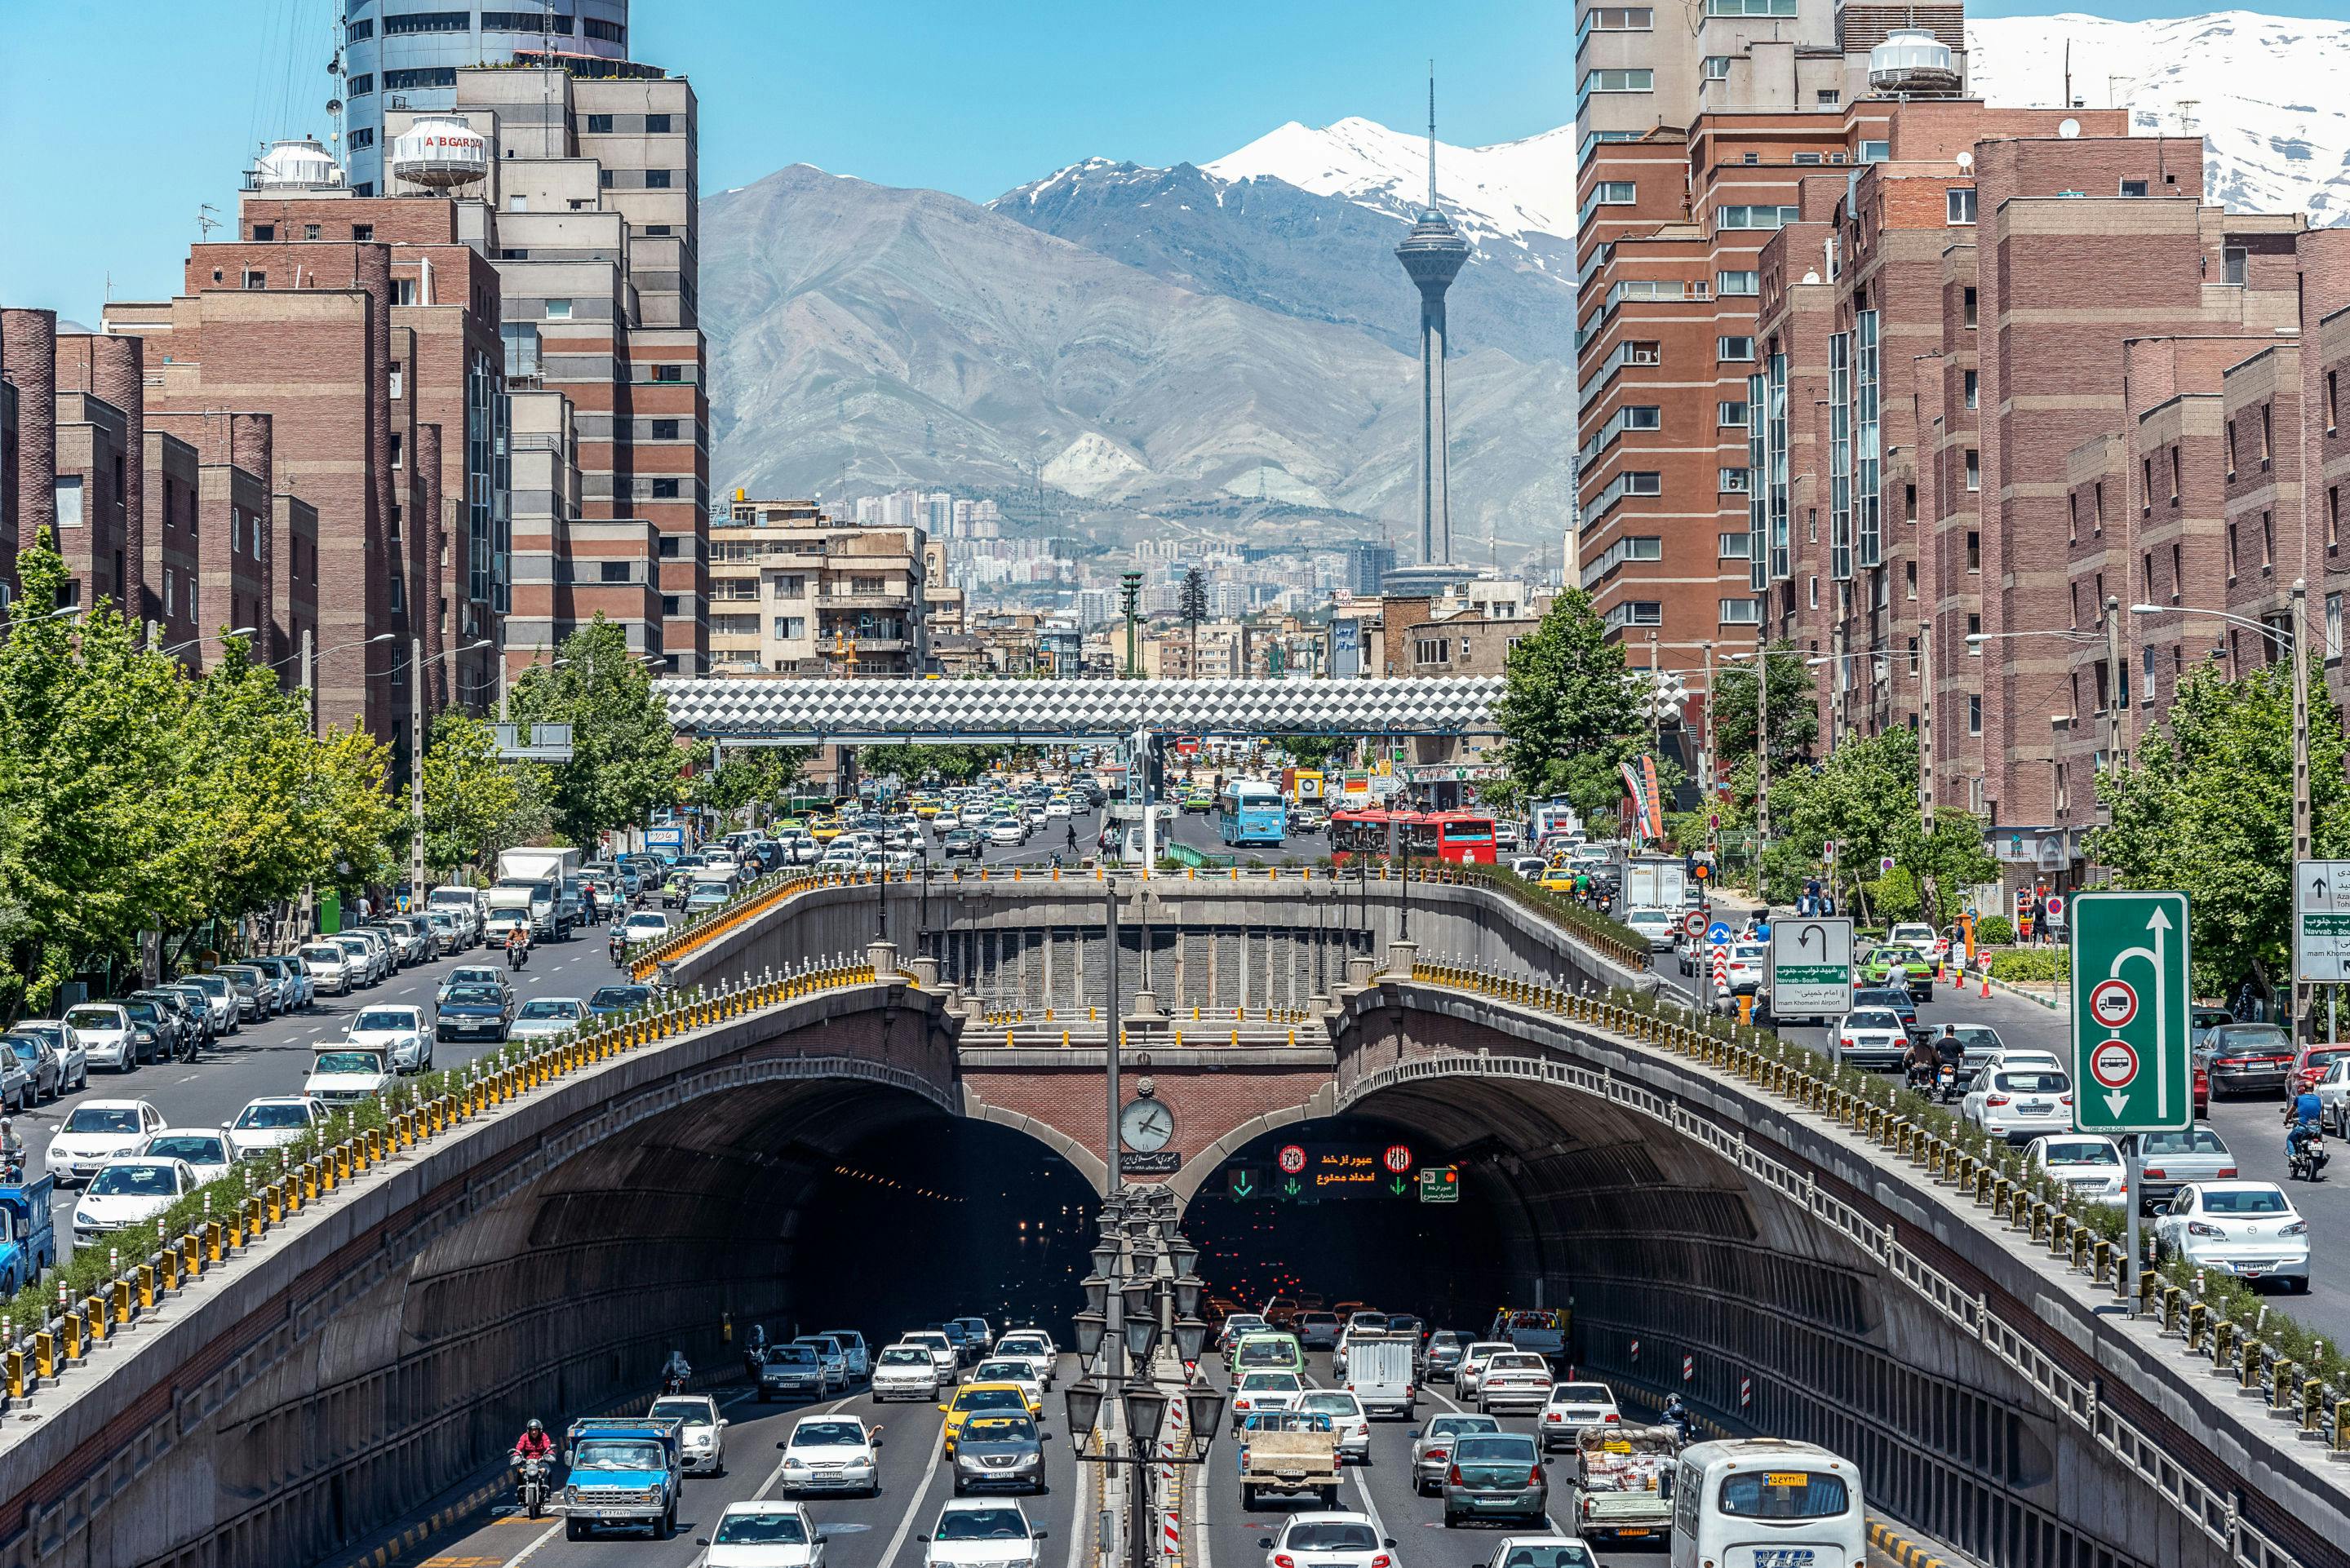 Traffic in Tehran, Iran looks like a dozen lanes each way across a soaring bridge and tunnel system, with motorcyles, international tourists, businessmen, autobuses, and even pedestrians. The image is framed against a mountainous backdrop  found in these areas of the Middle East and Central / West Asia.